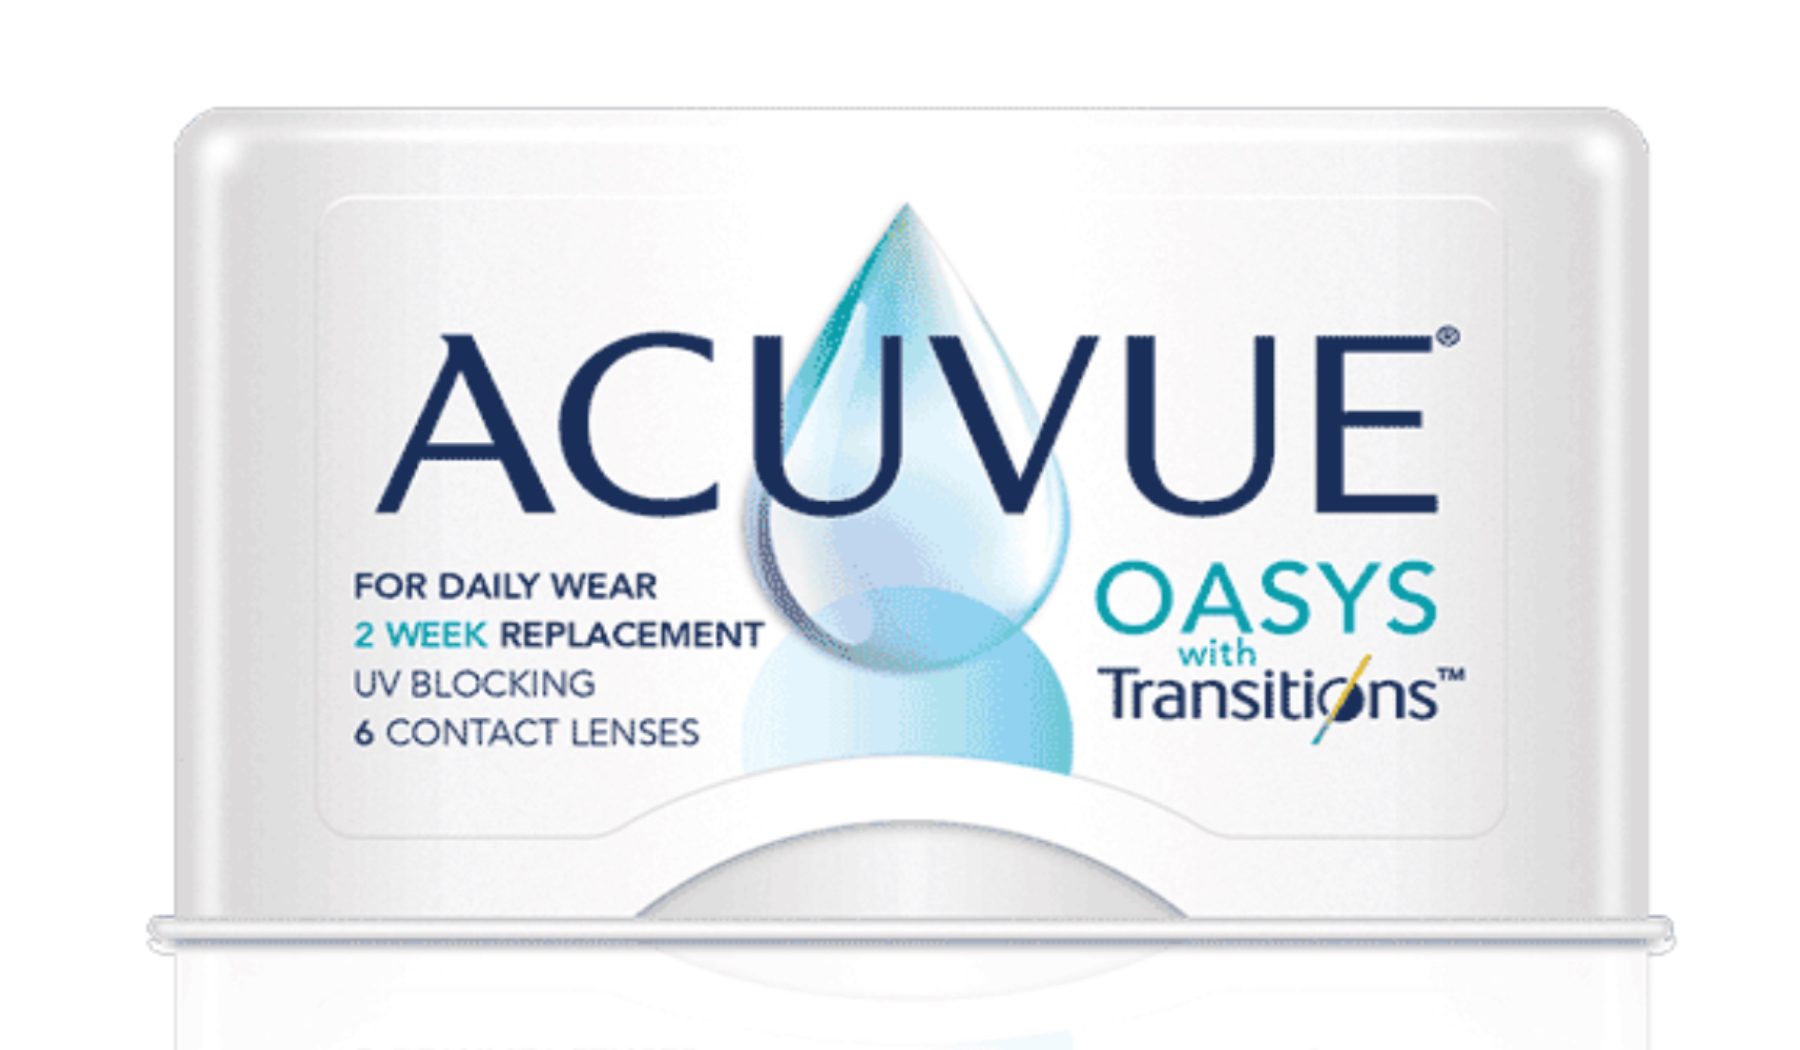 Acuvue Oasys Transitions contact lenses